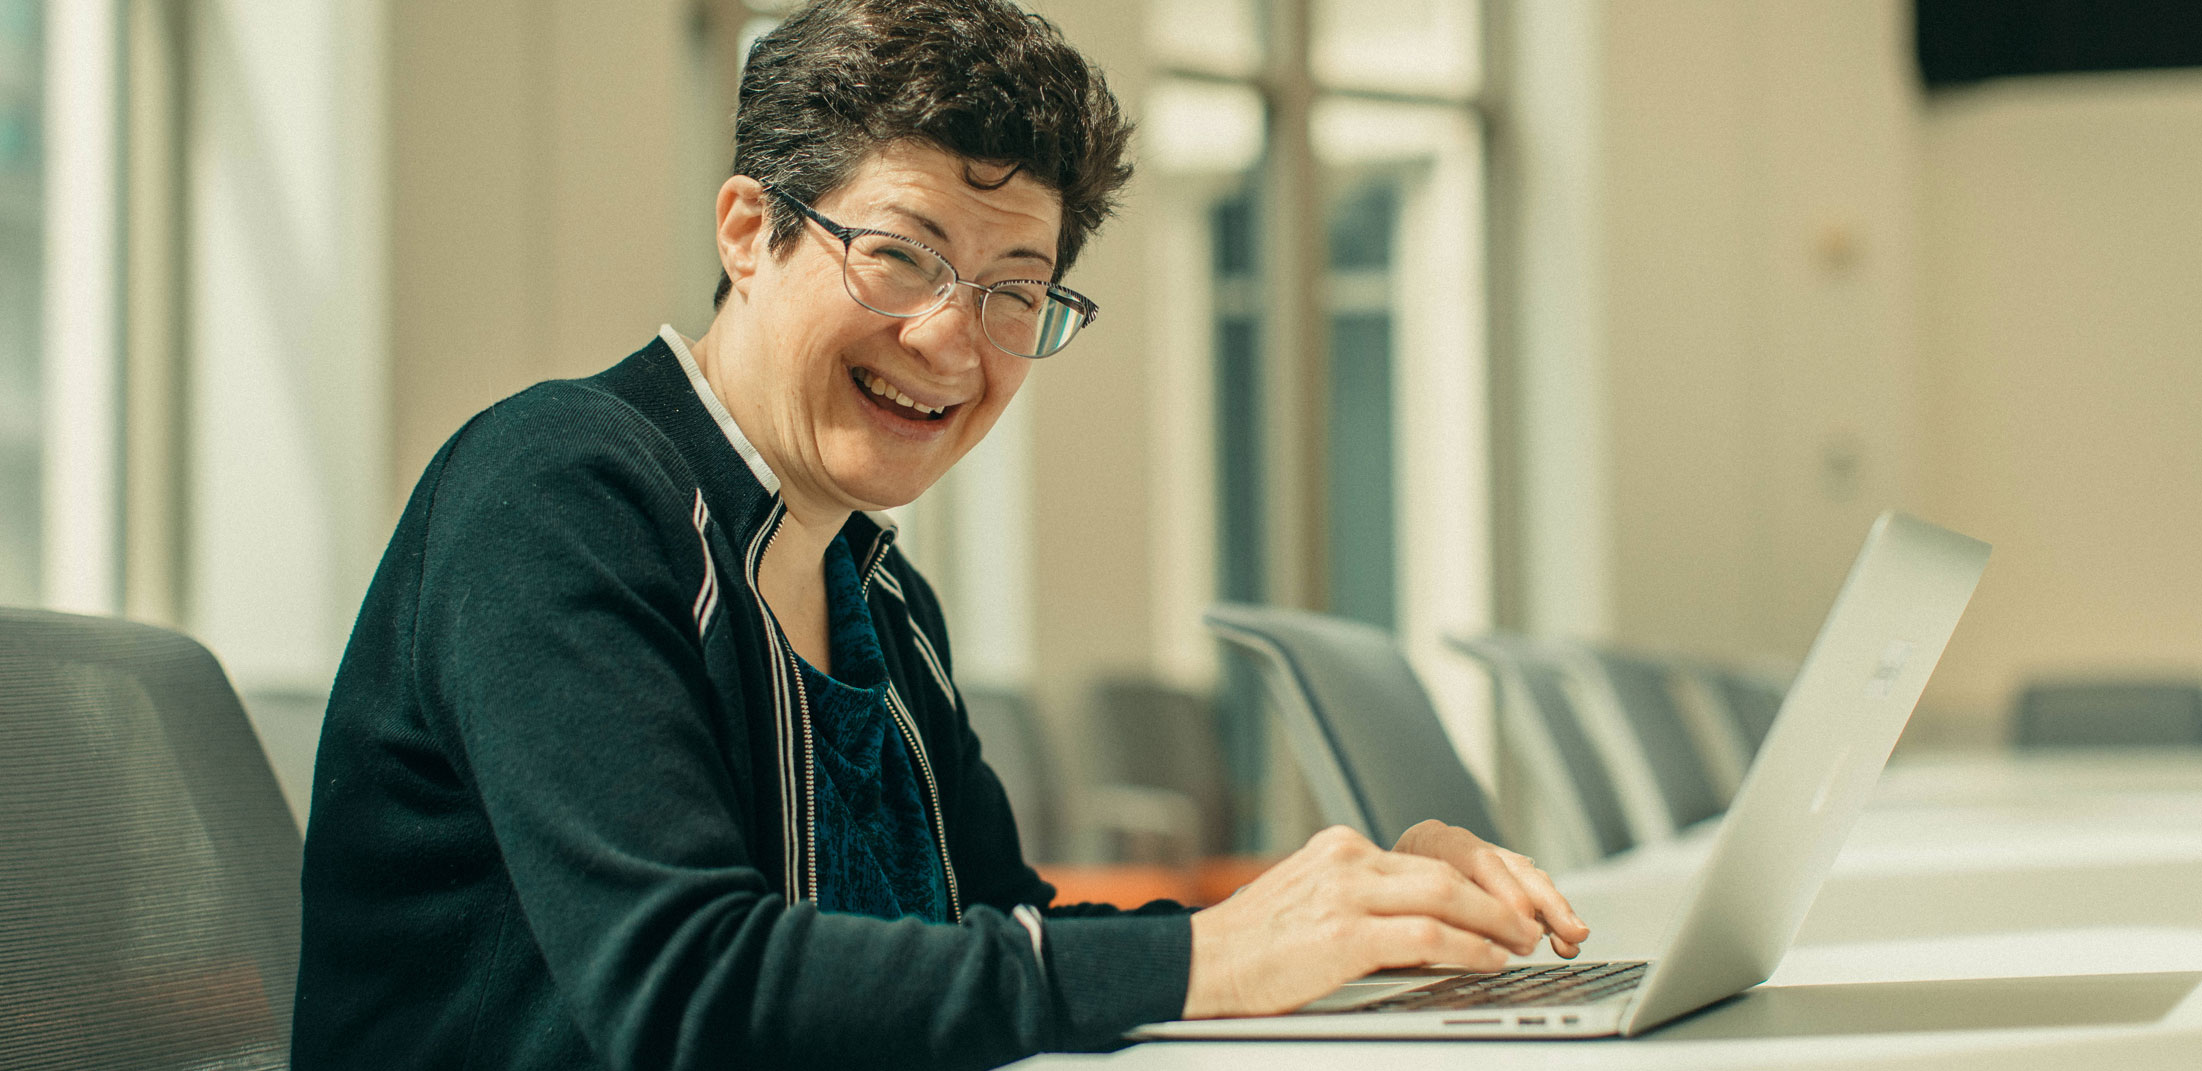 Woman smiling and using a laptop.